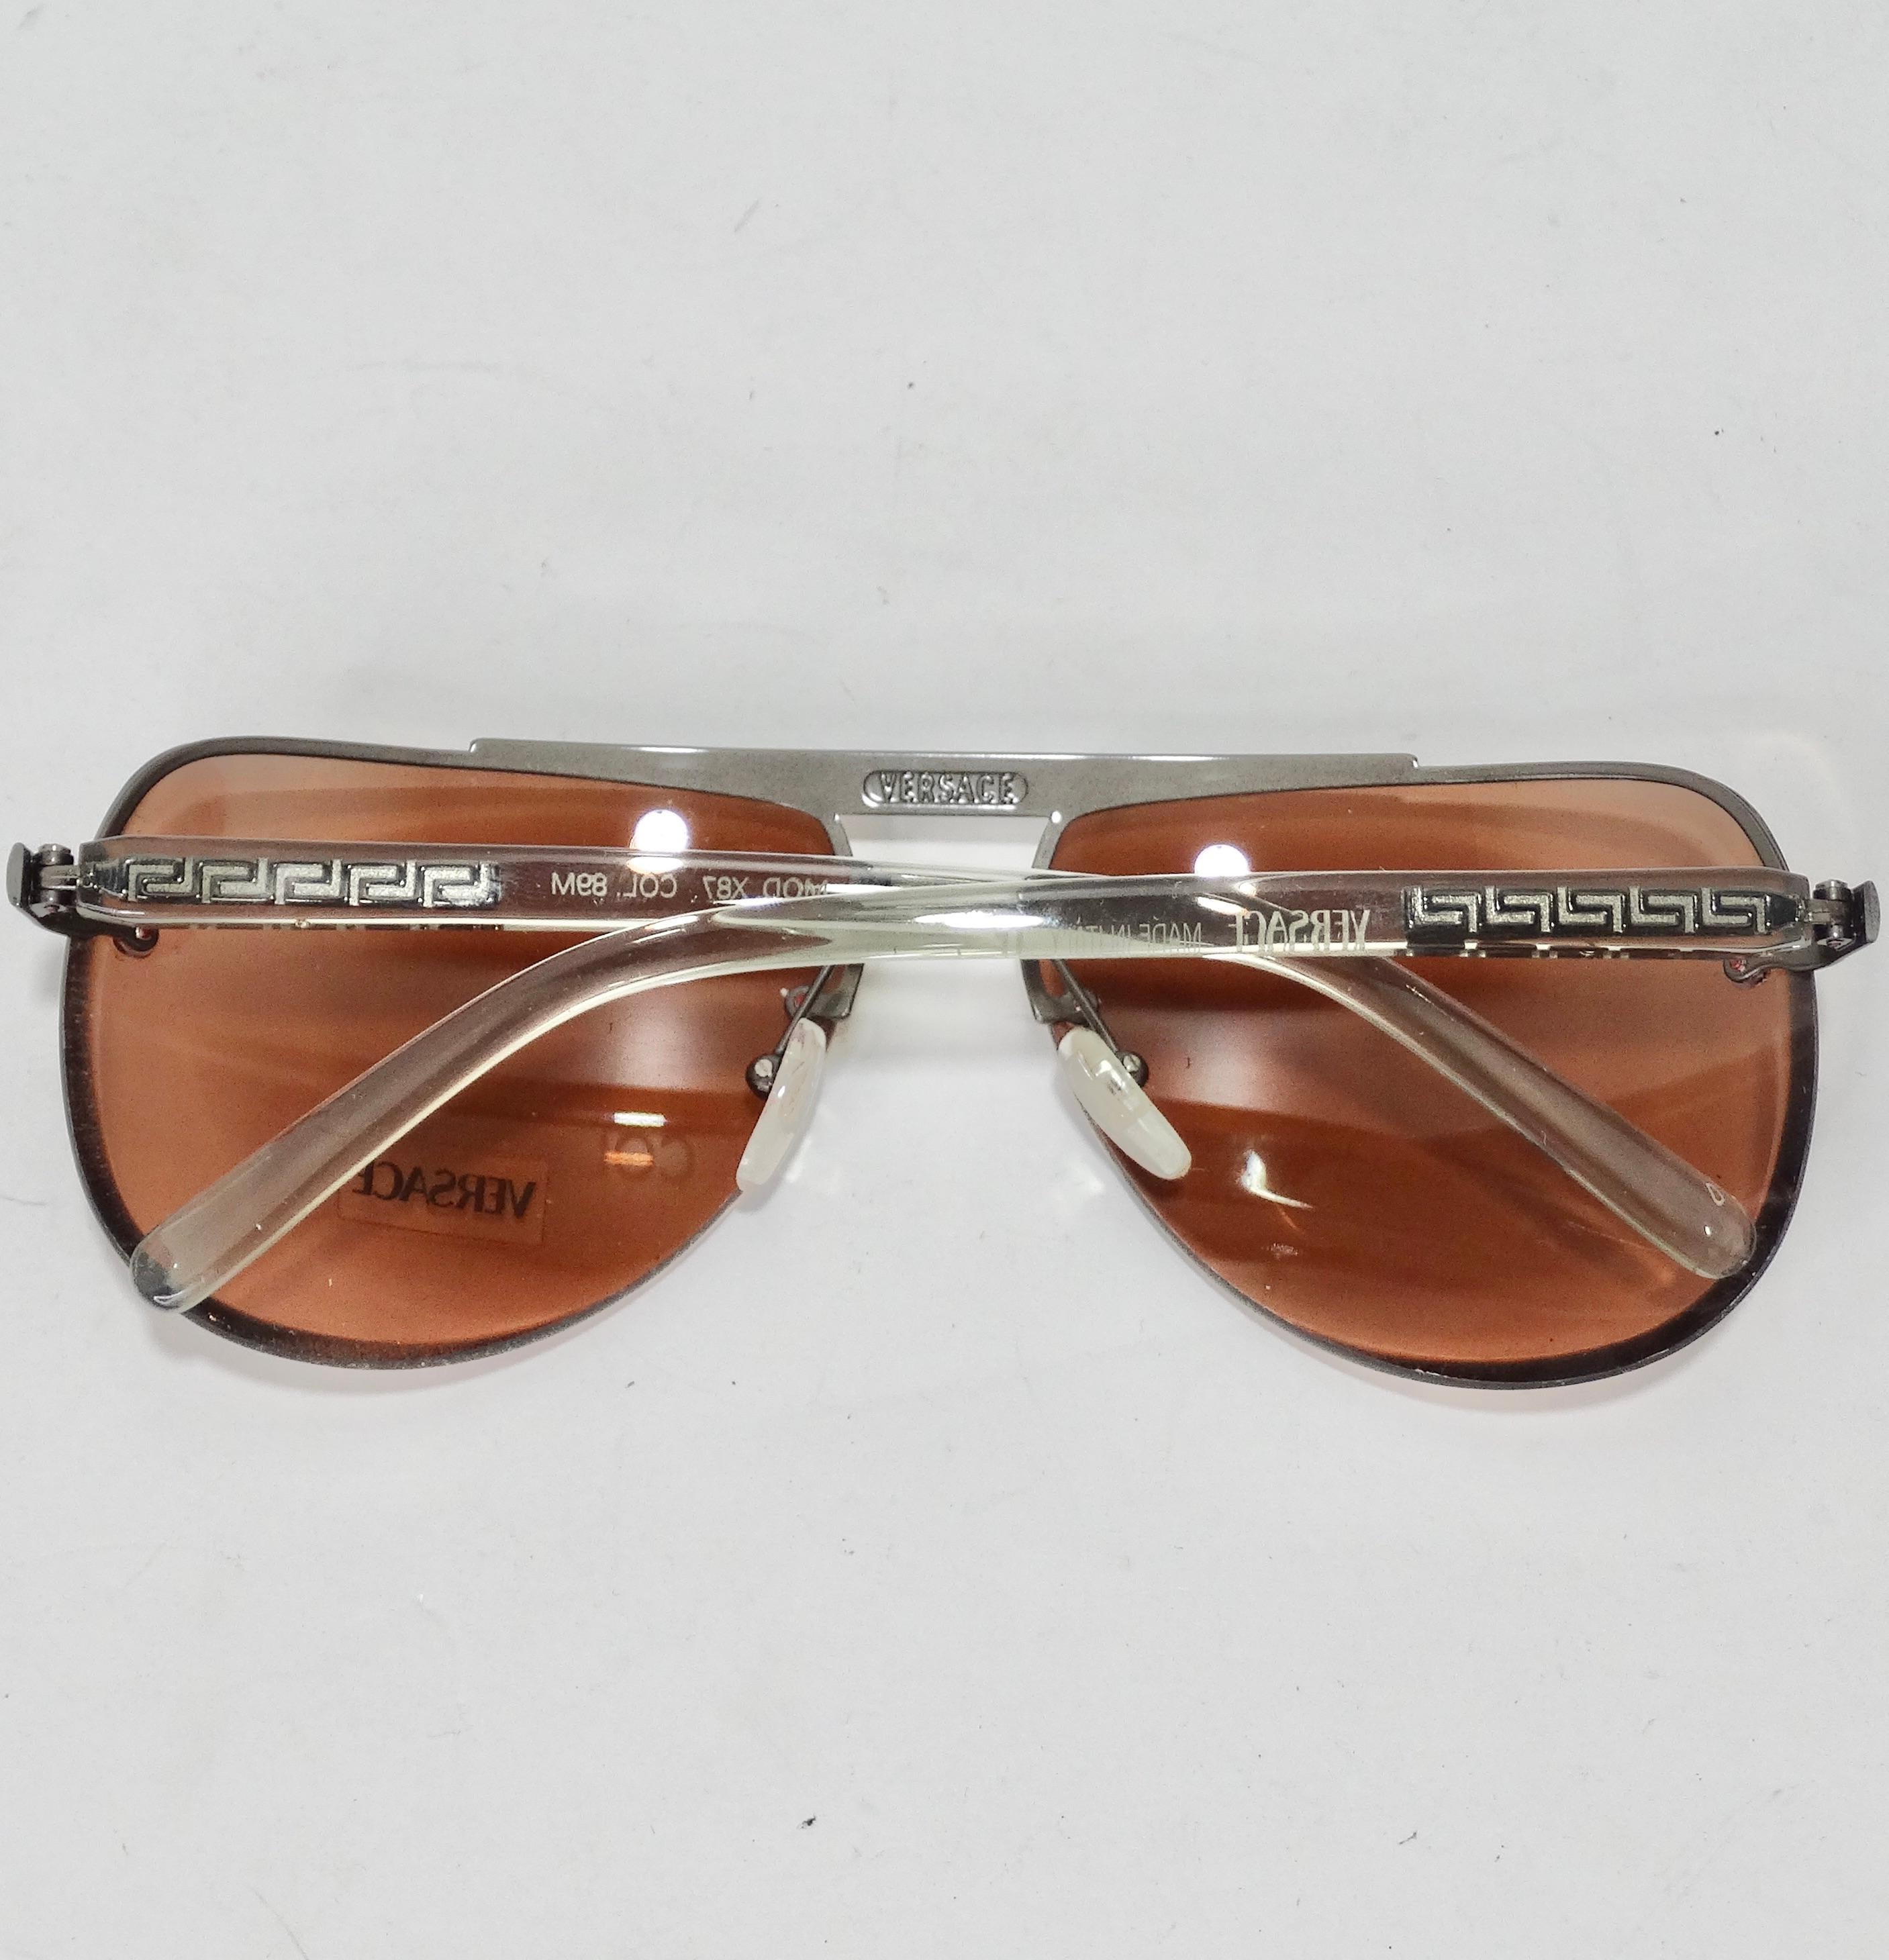 Get your hands on these incredible Versace dead stock sunglasses circa 1990s! The perfect aviator style sunglasses featuring dusty rose lenses alongside silver tone detailing. These are such a classic and fun statement pair of sunglasses! Match